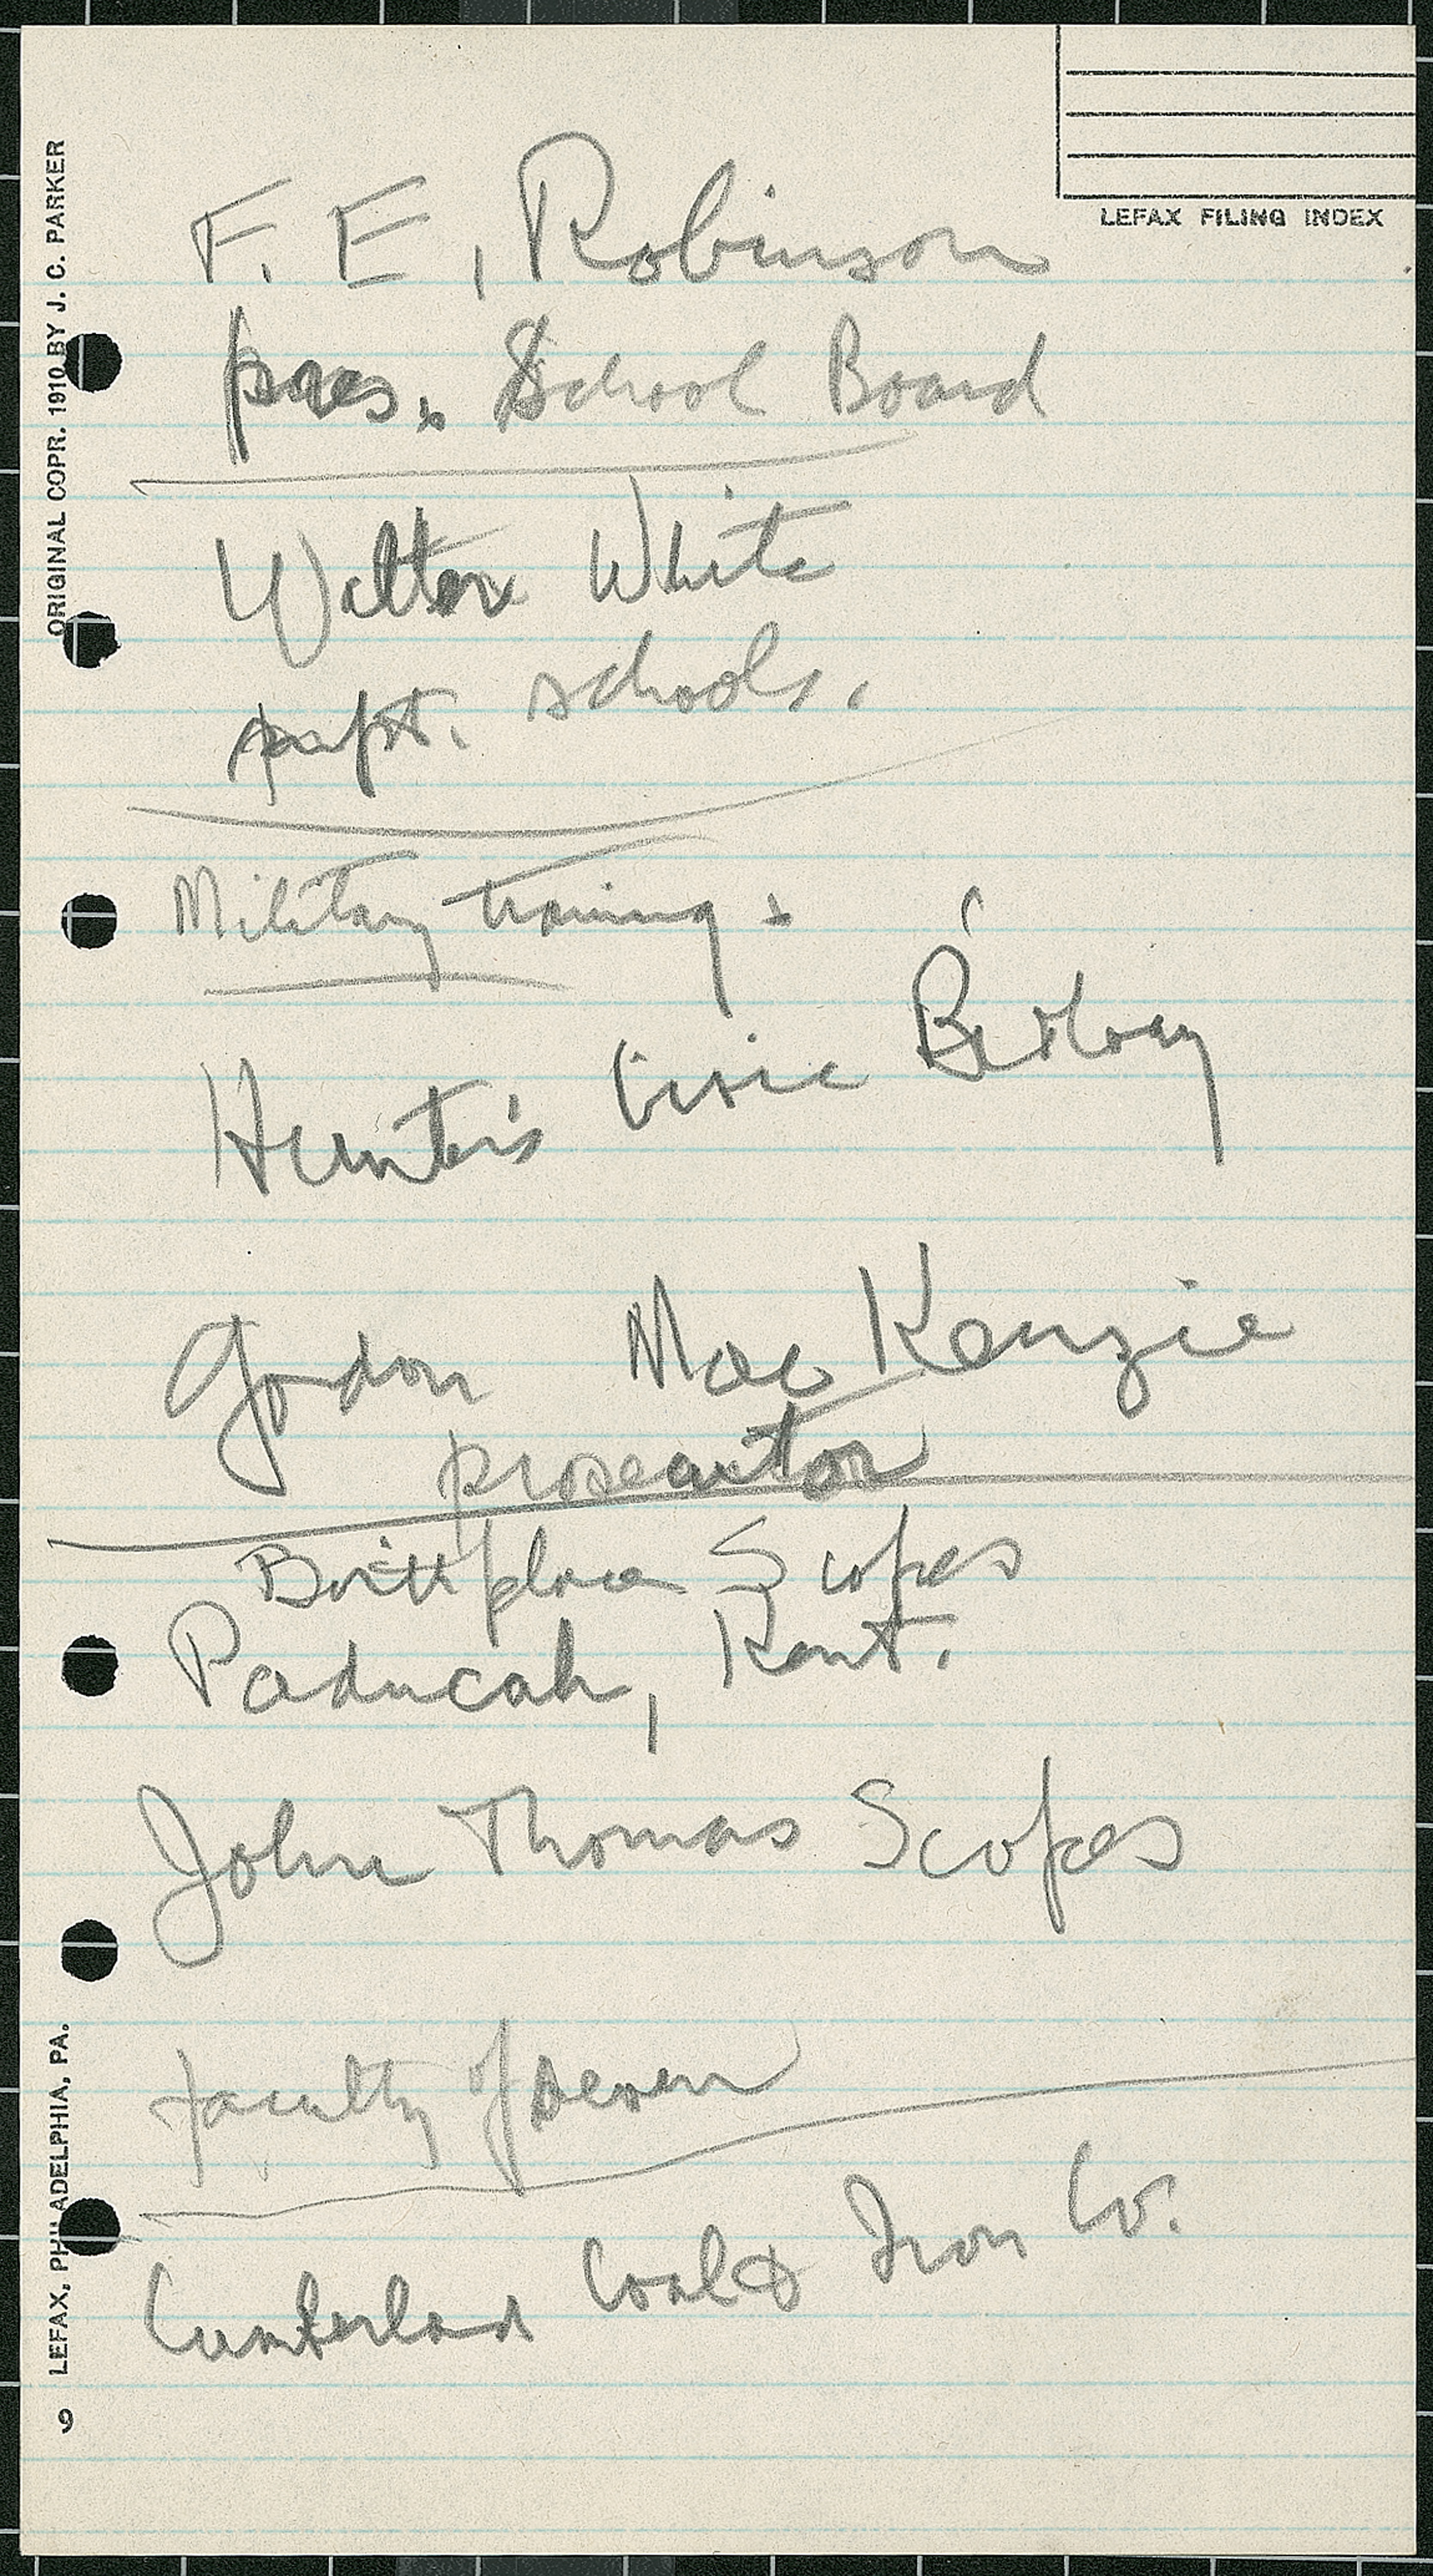 Watson Davis’s handwritten notes on the day he first met John Thomas Scopes in June 1925. Smithsonian Institution Archives.